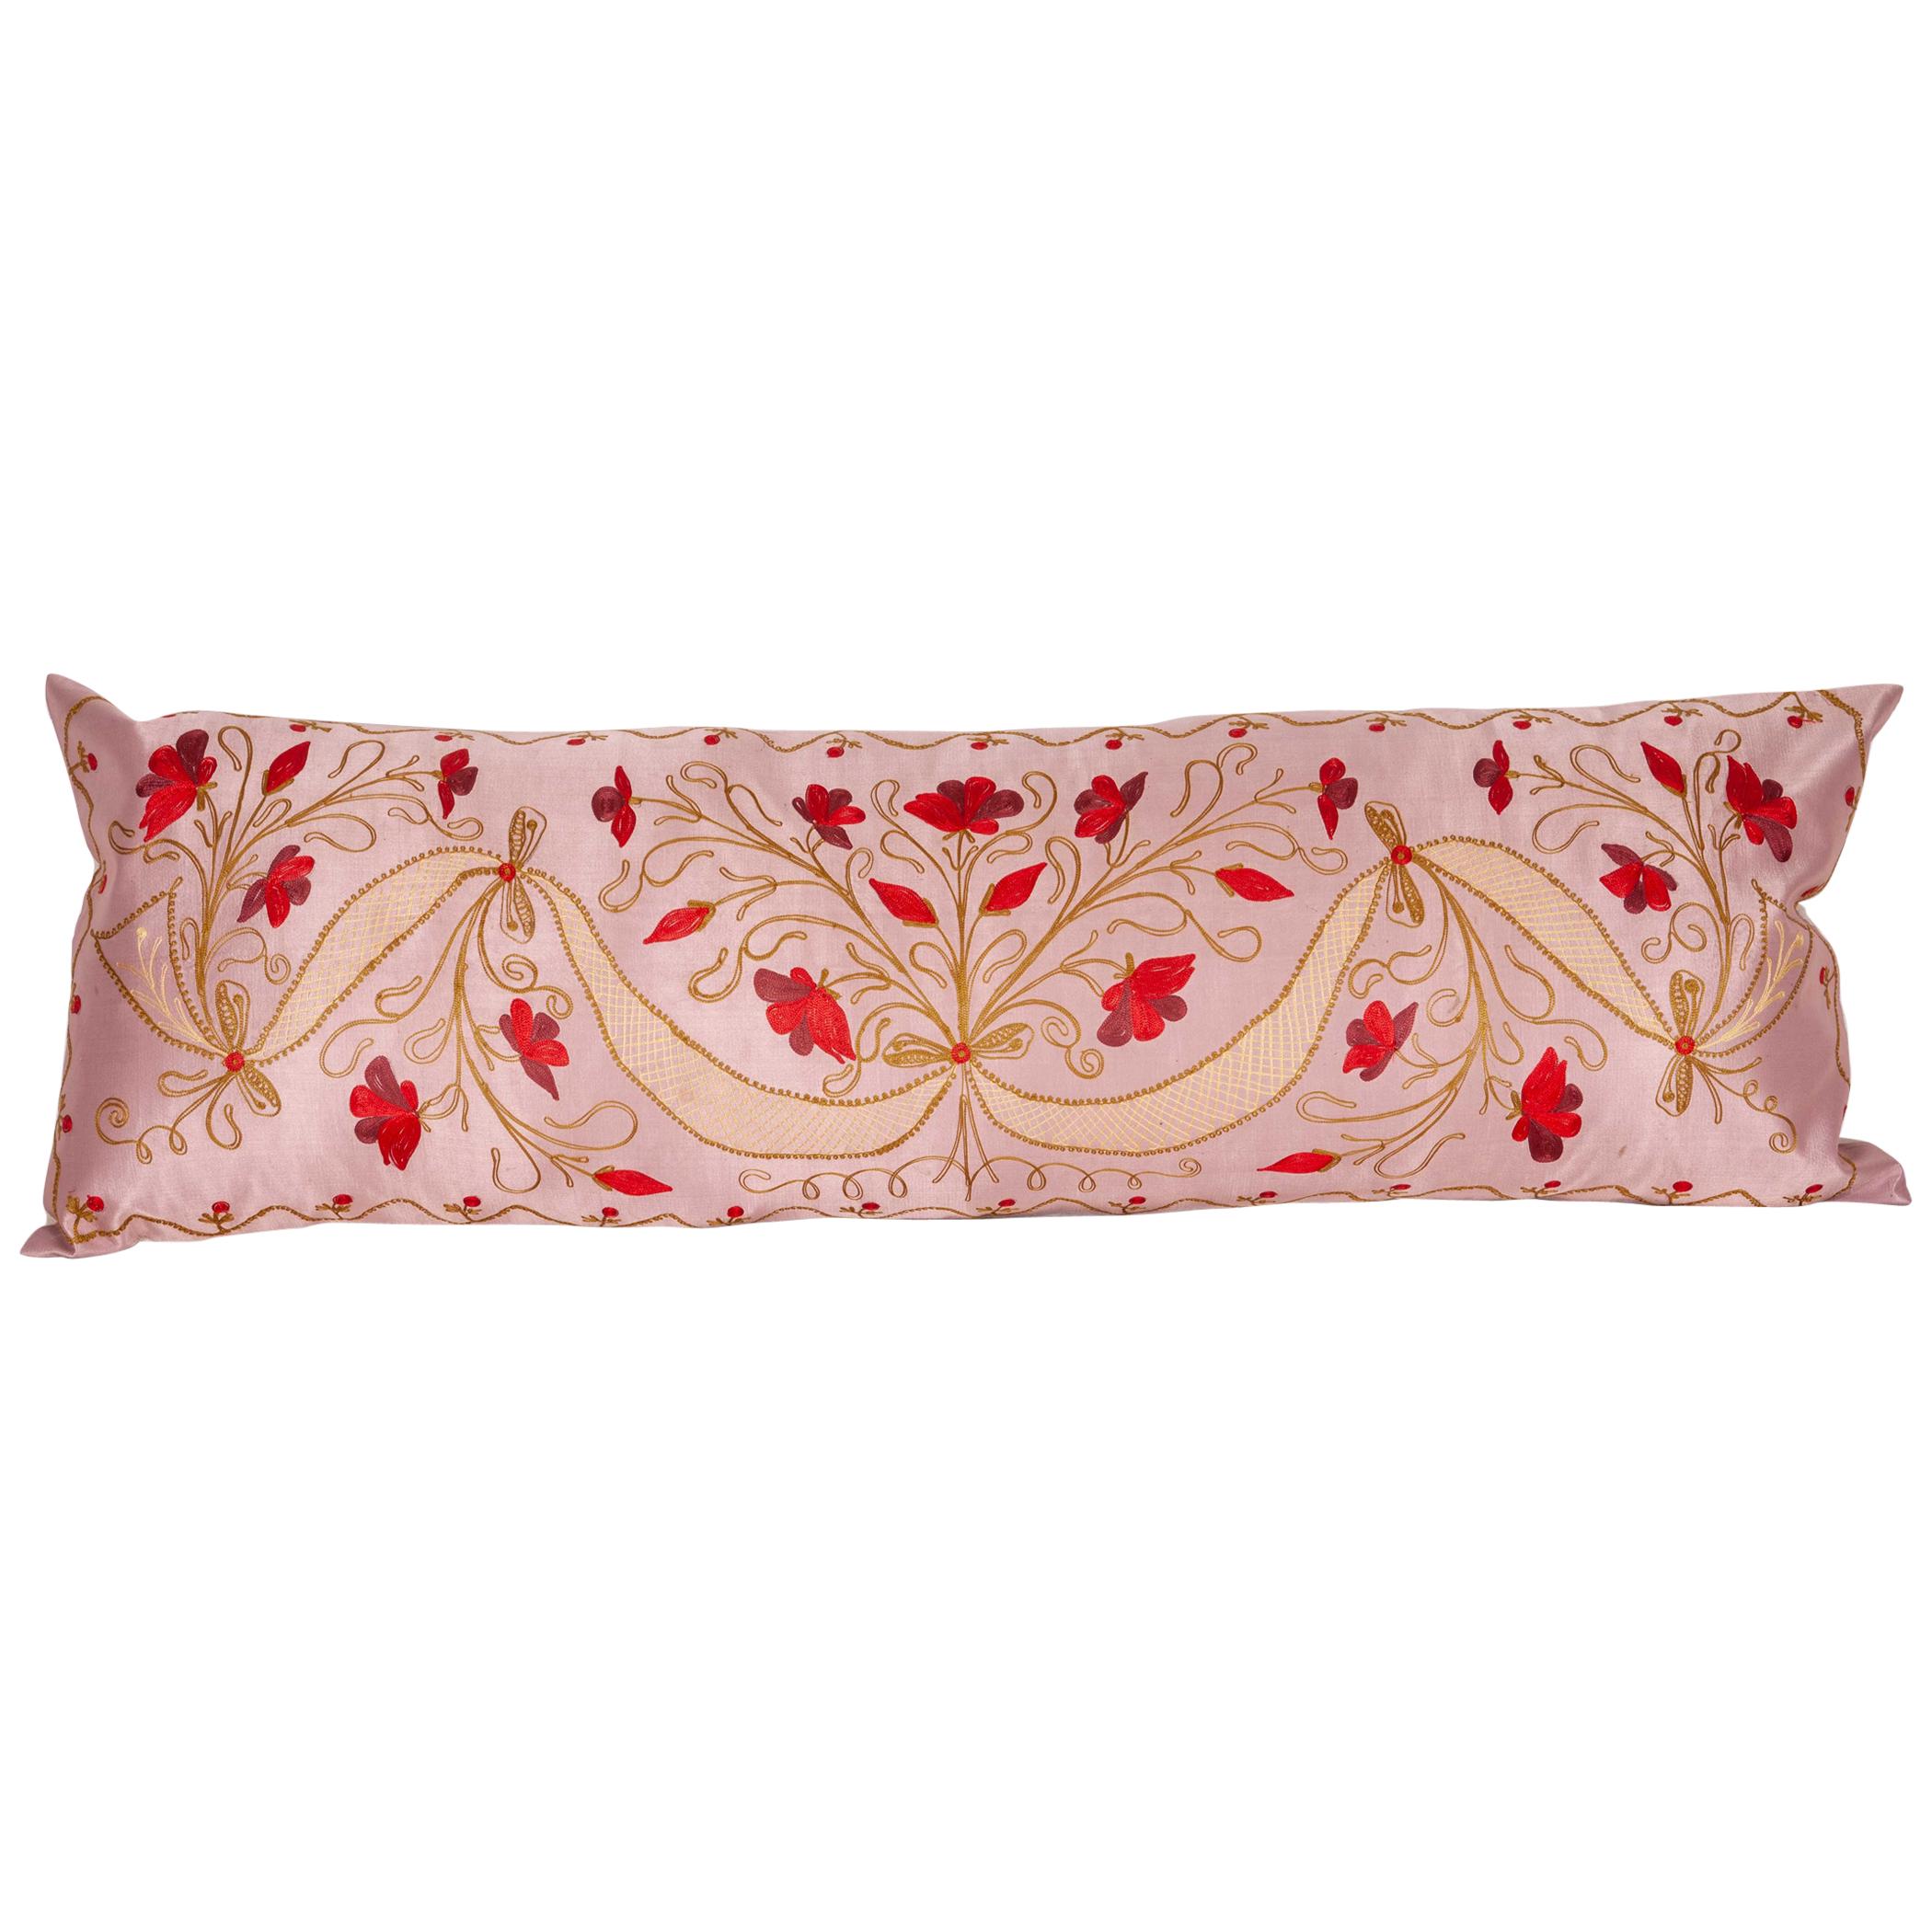 Large Pillow Case Fashioned from a Early 20th Century Syrian Divan Cover